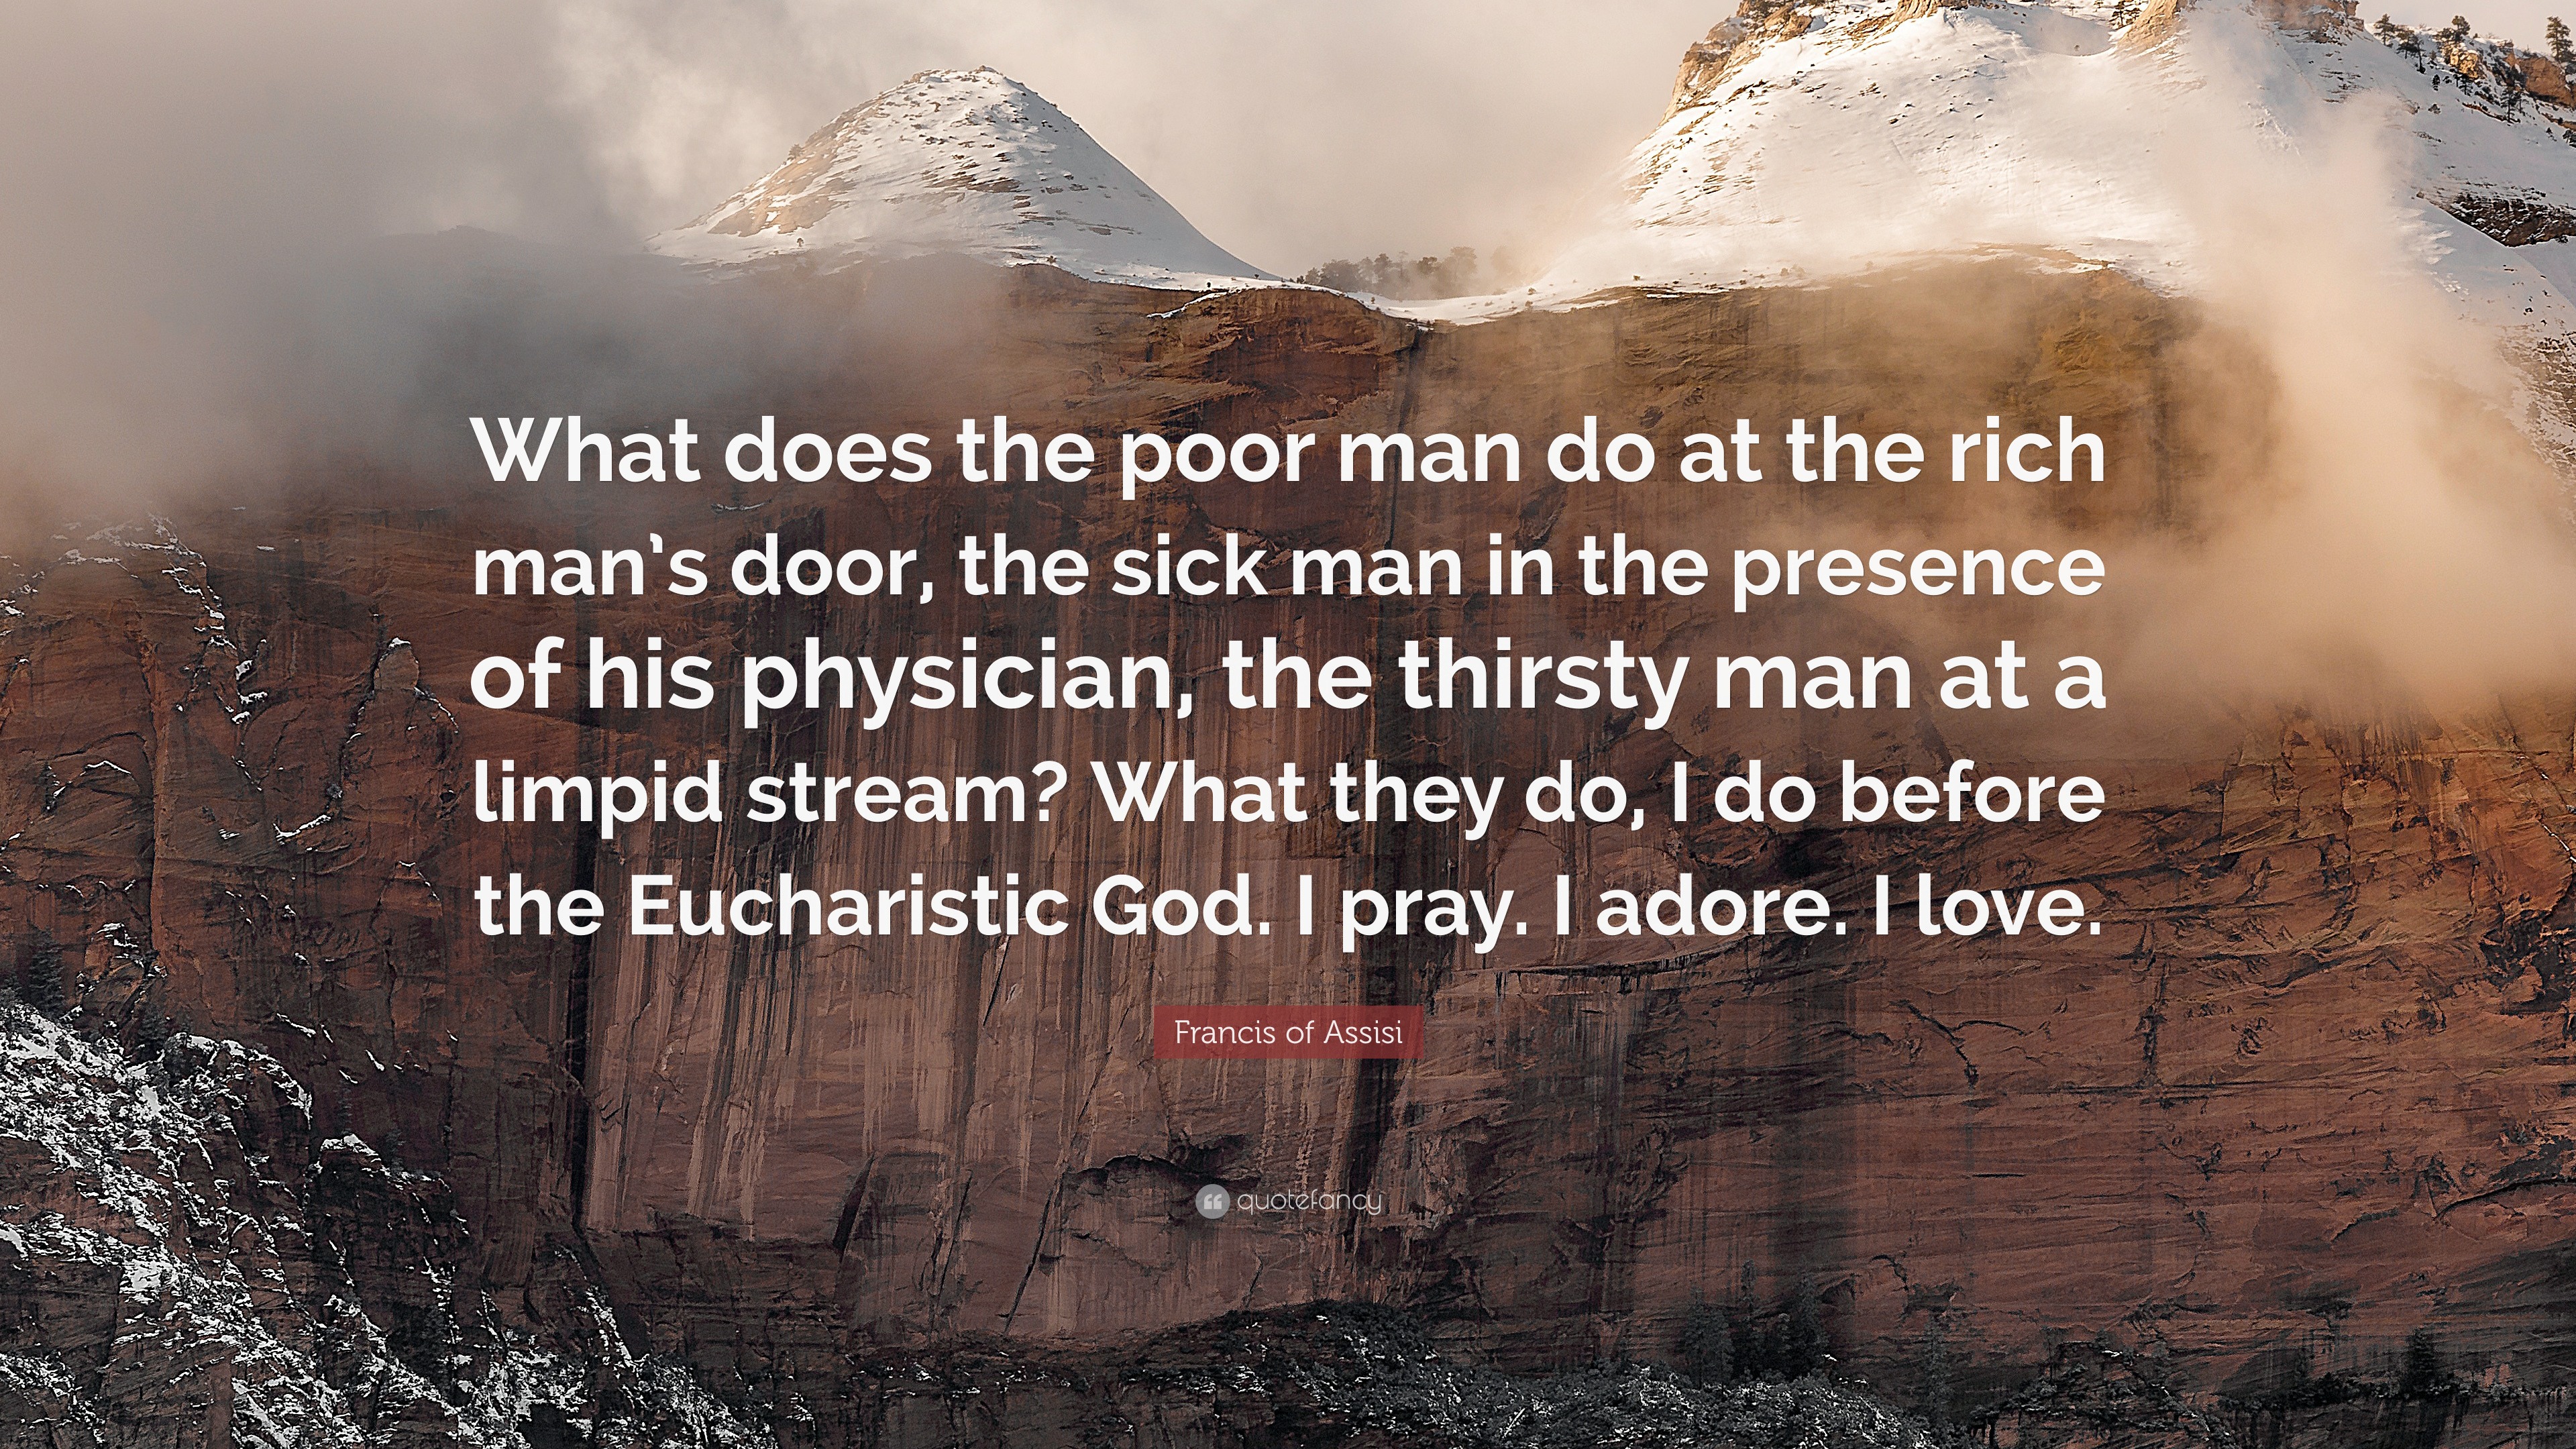 Francis of Assisi Quote “What does the poor man do at the rich man s